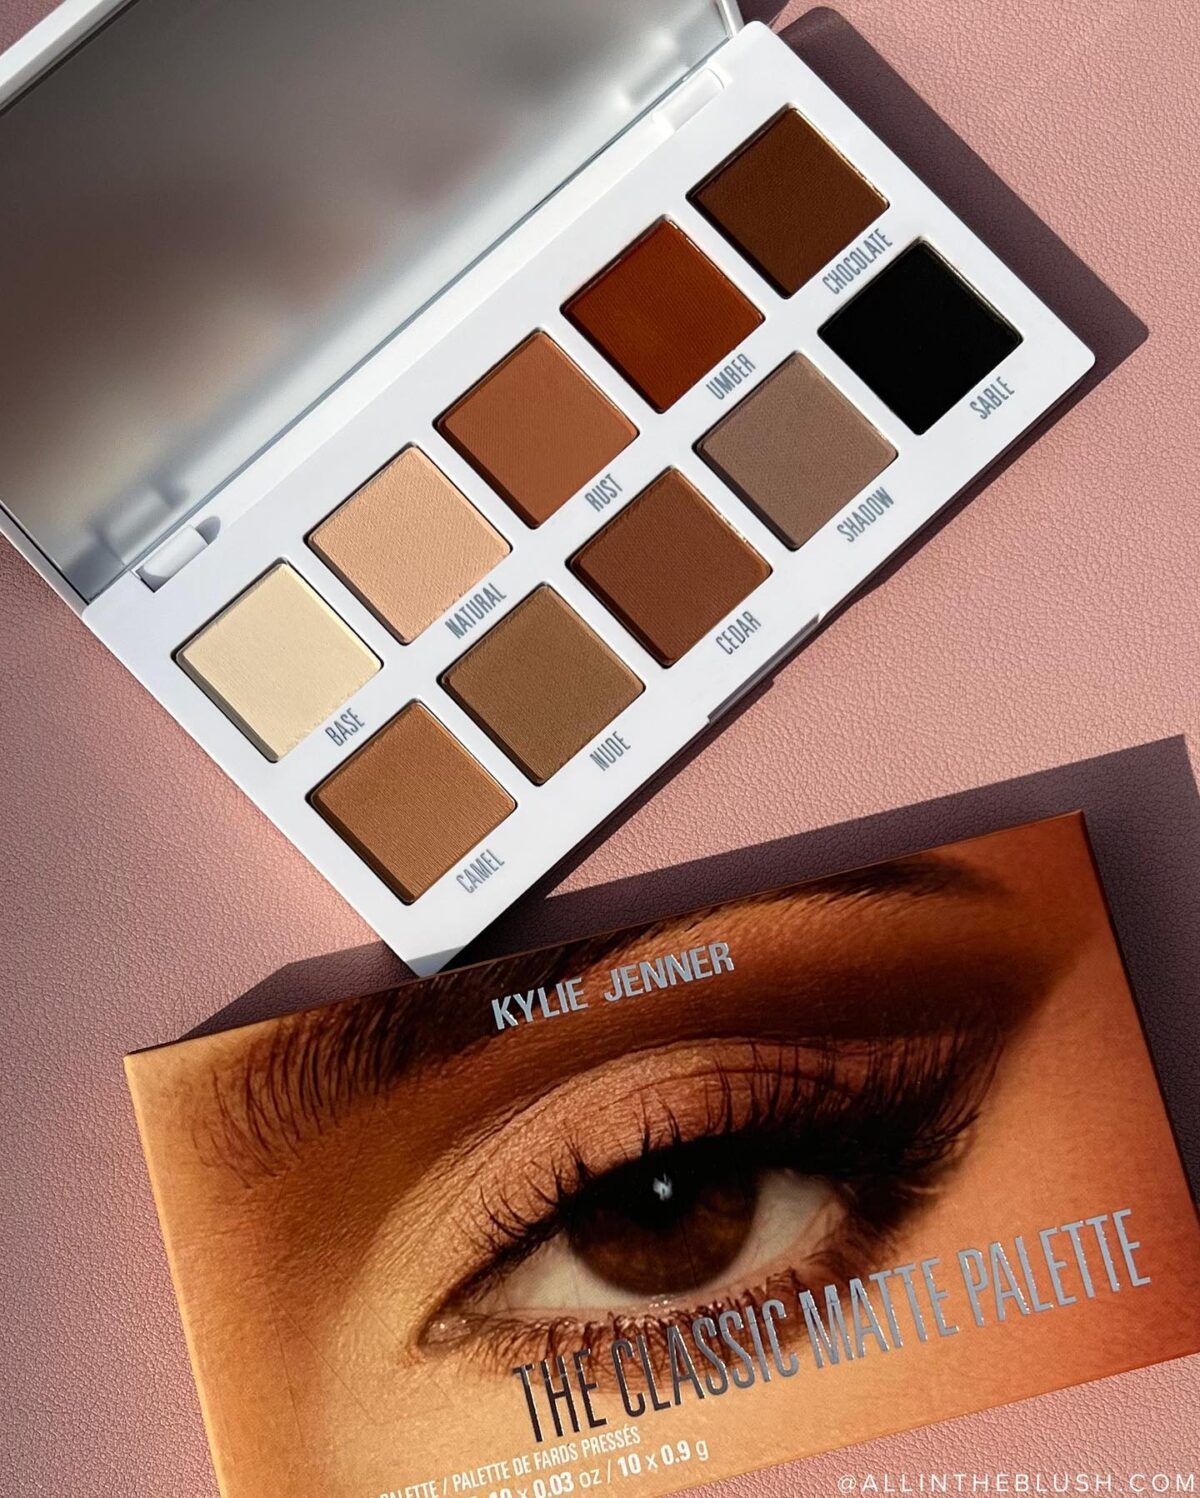 NEW from Kylie Cosmetics: The Classic Matte Palette